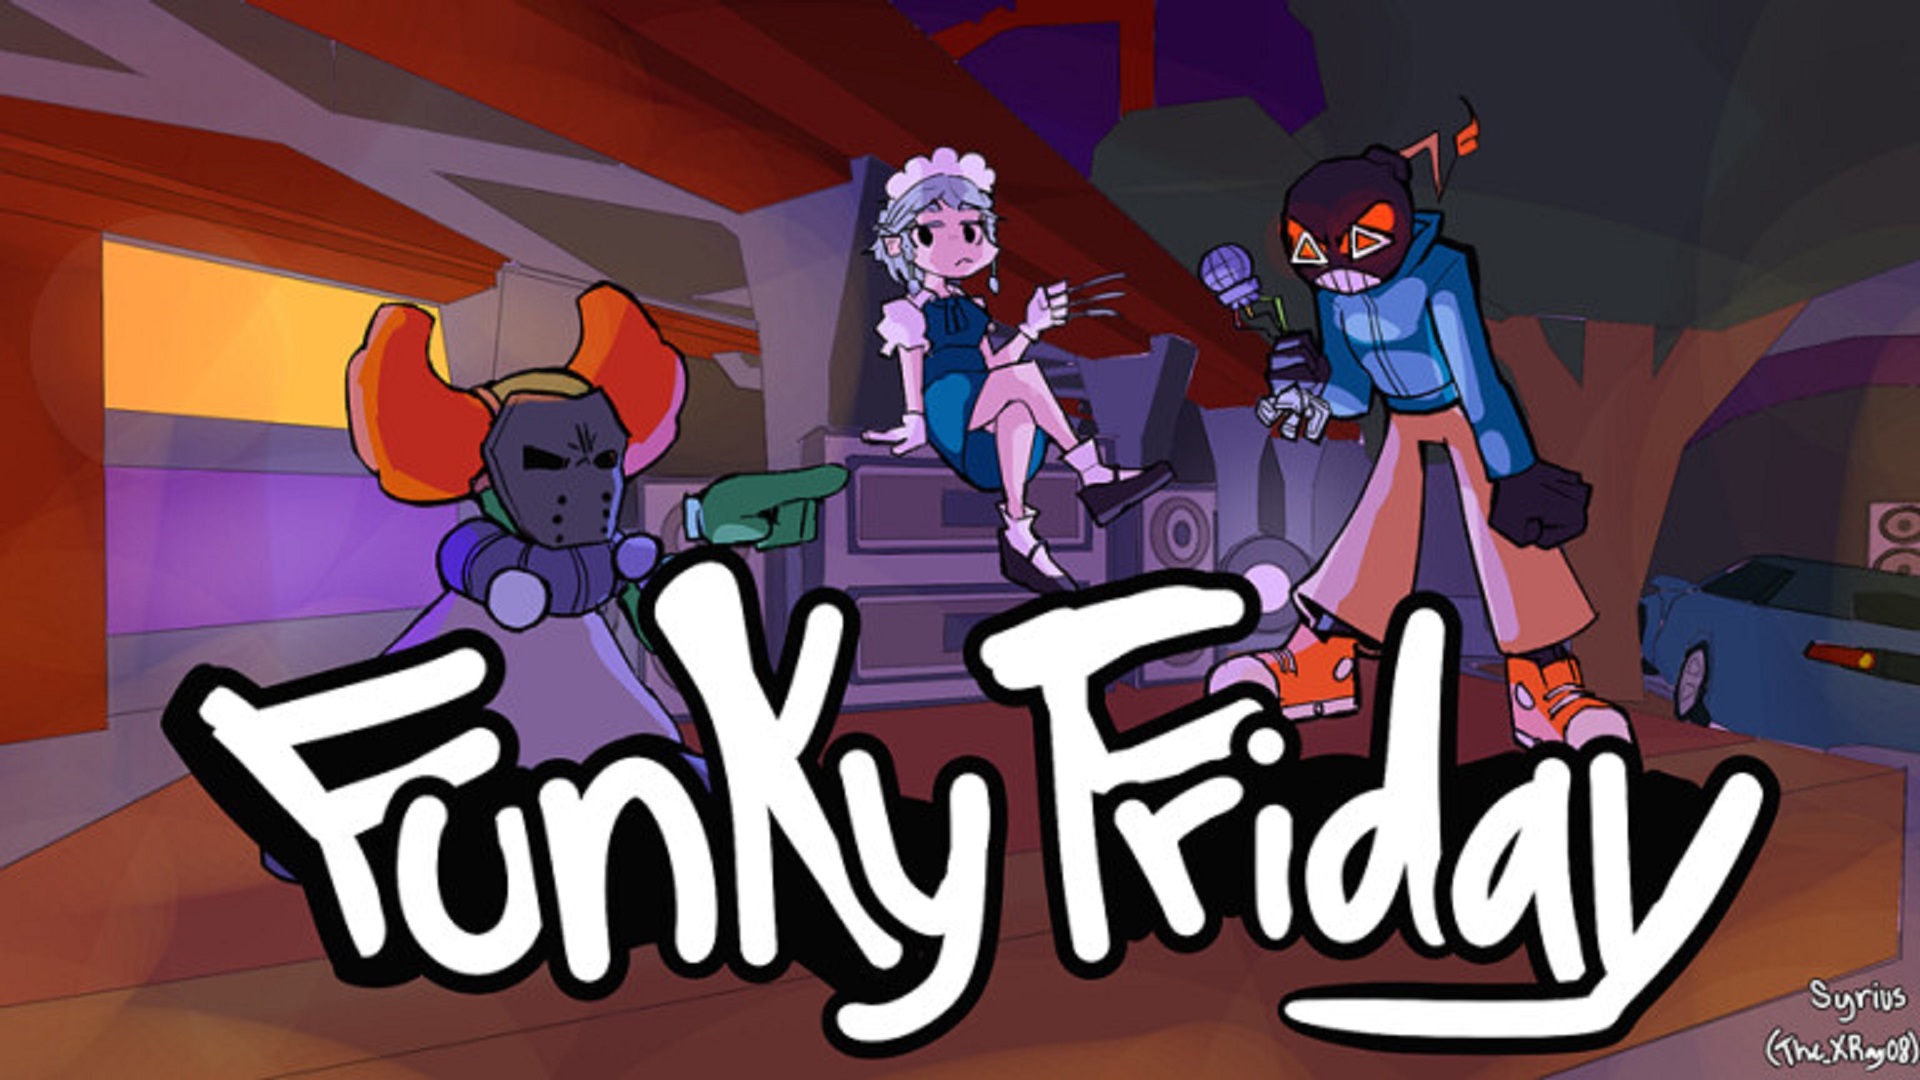 Funky Friday Codes April 2021 [Roblox Codes] - All Working Codes 